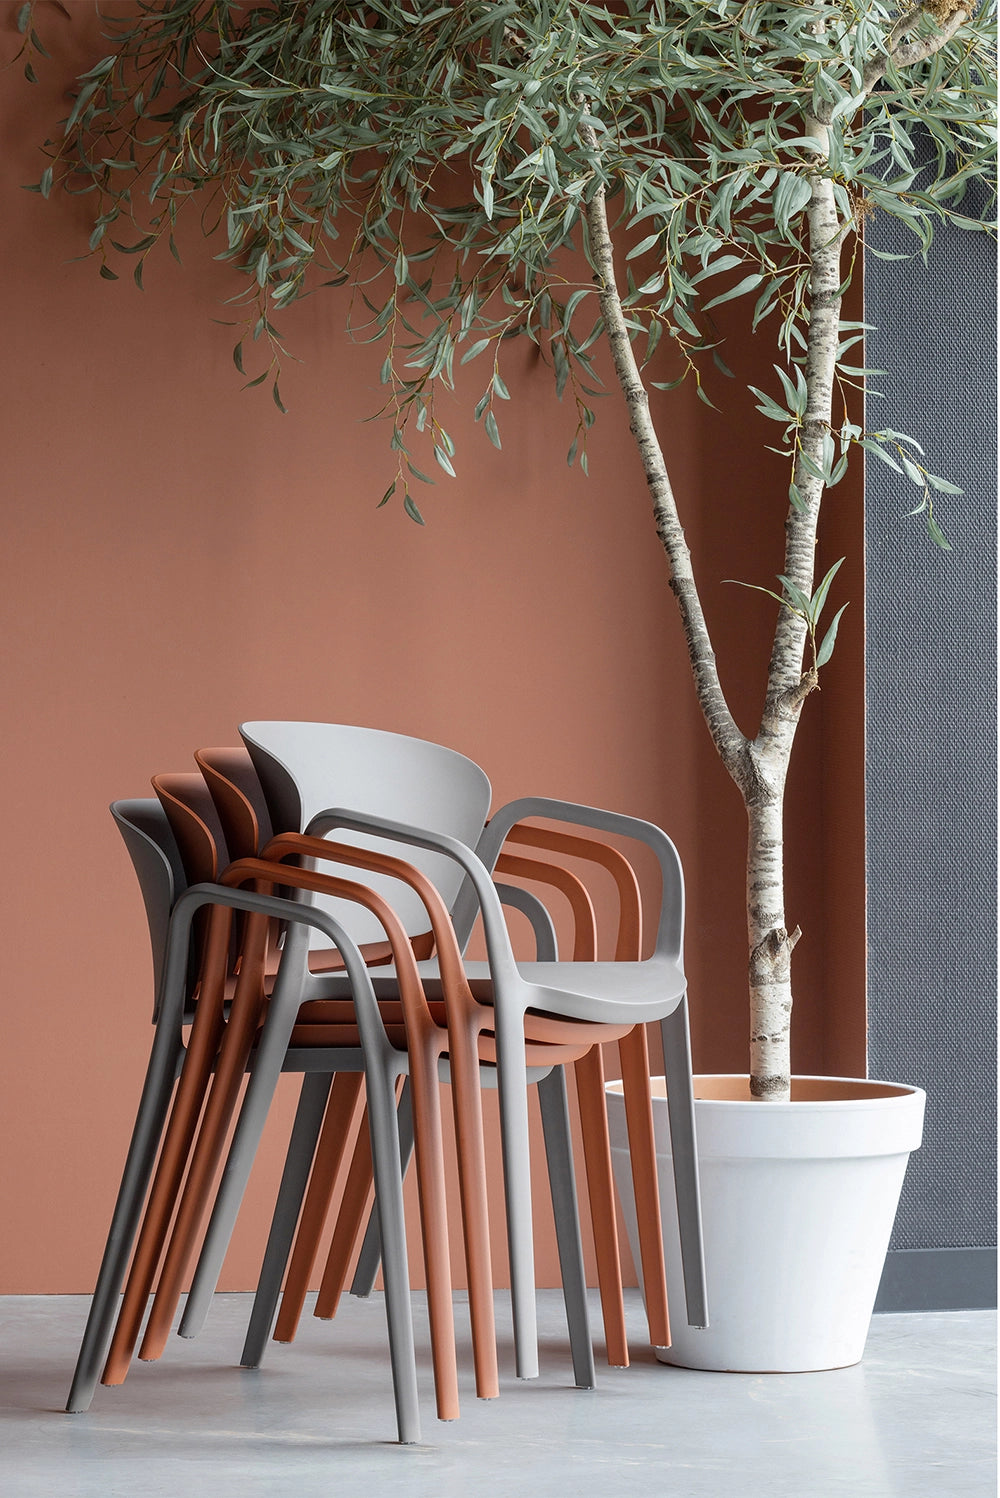 Greta Polypropylene Chair - Taupe Stacked Chairs with Indoor Plant in White Pot